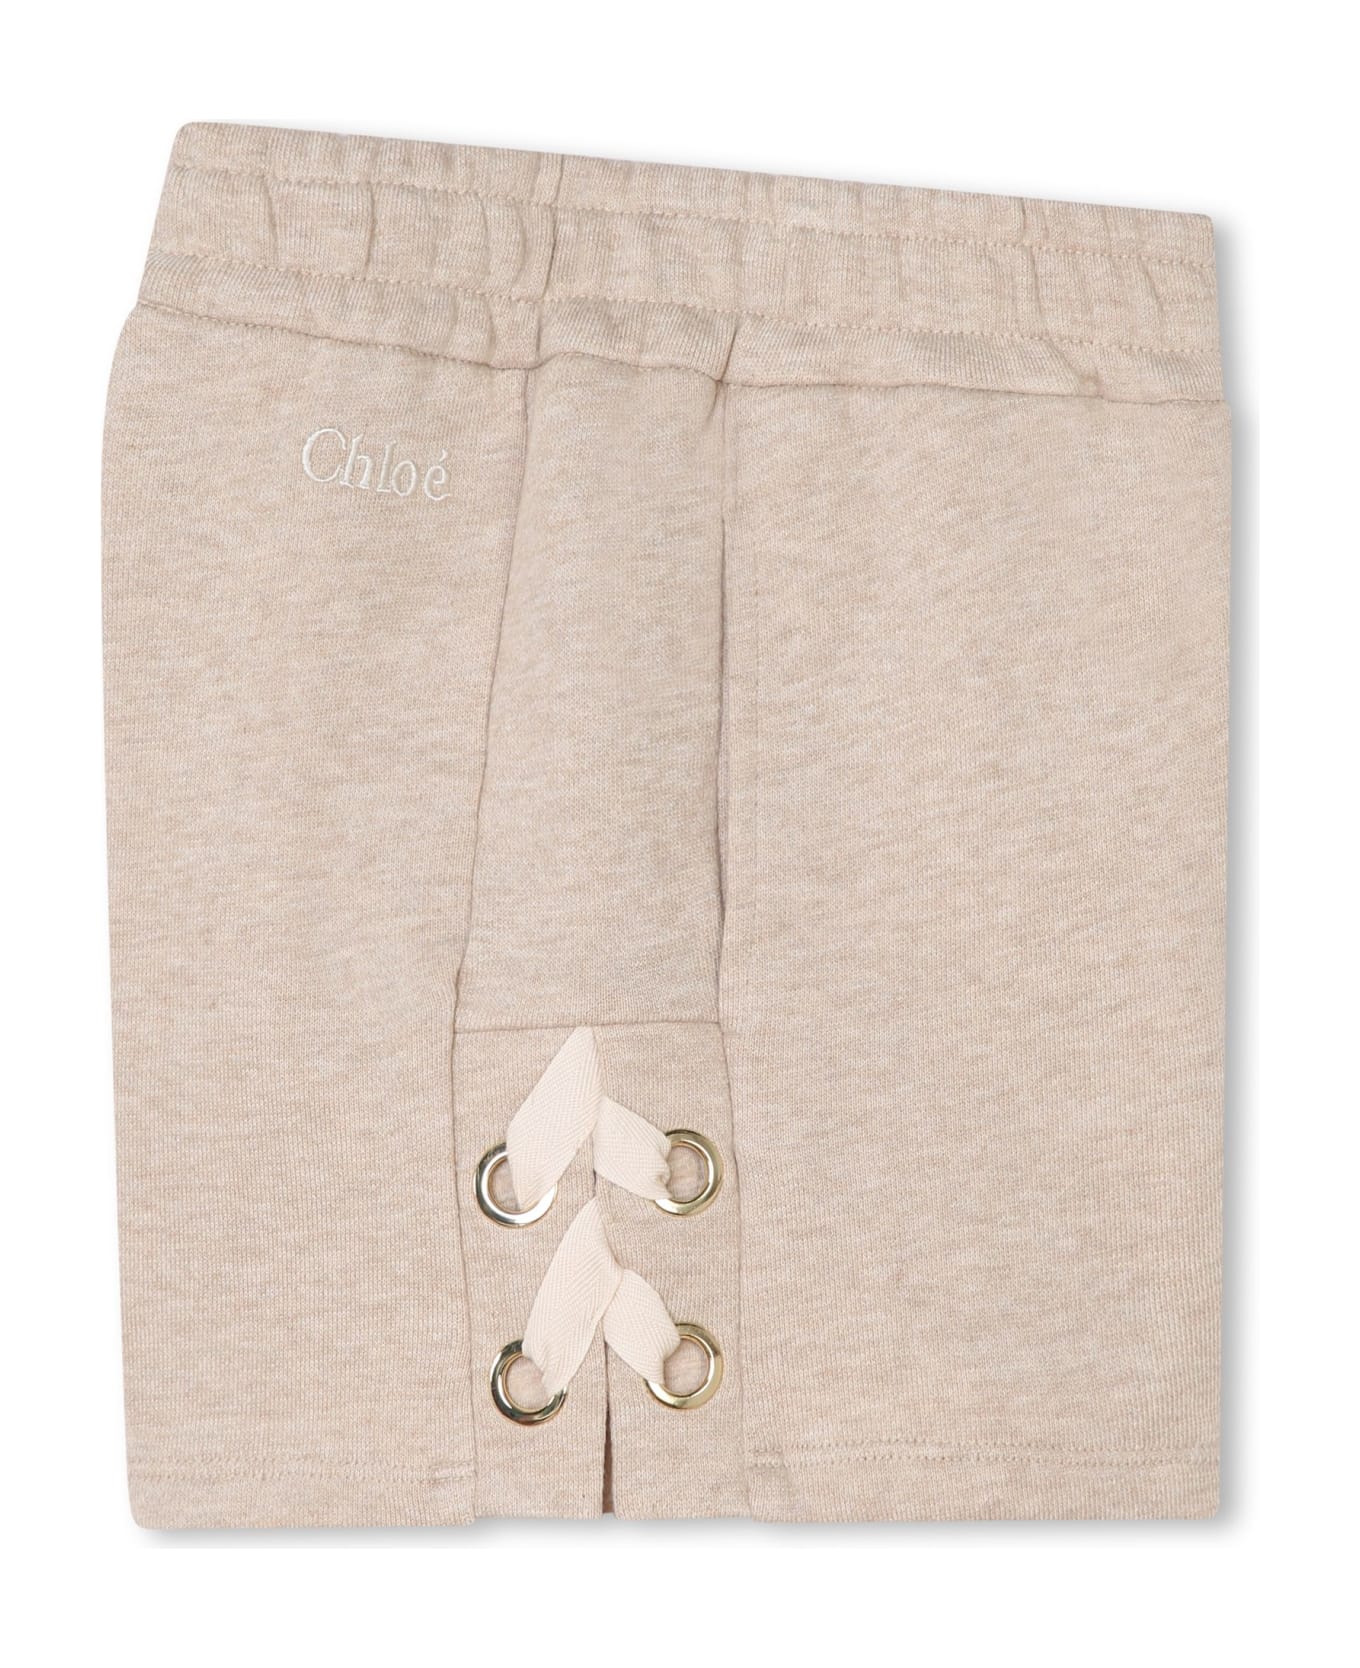 Chloé Shorts With Embroidery - Beige ボトムス